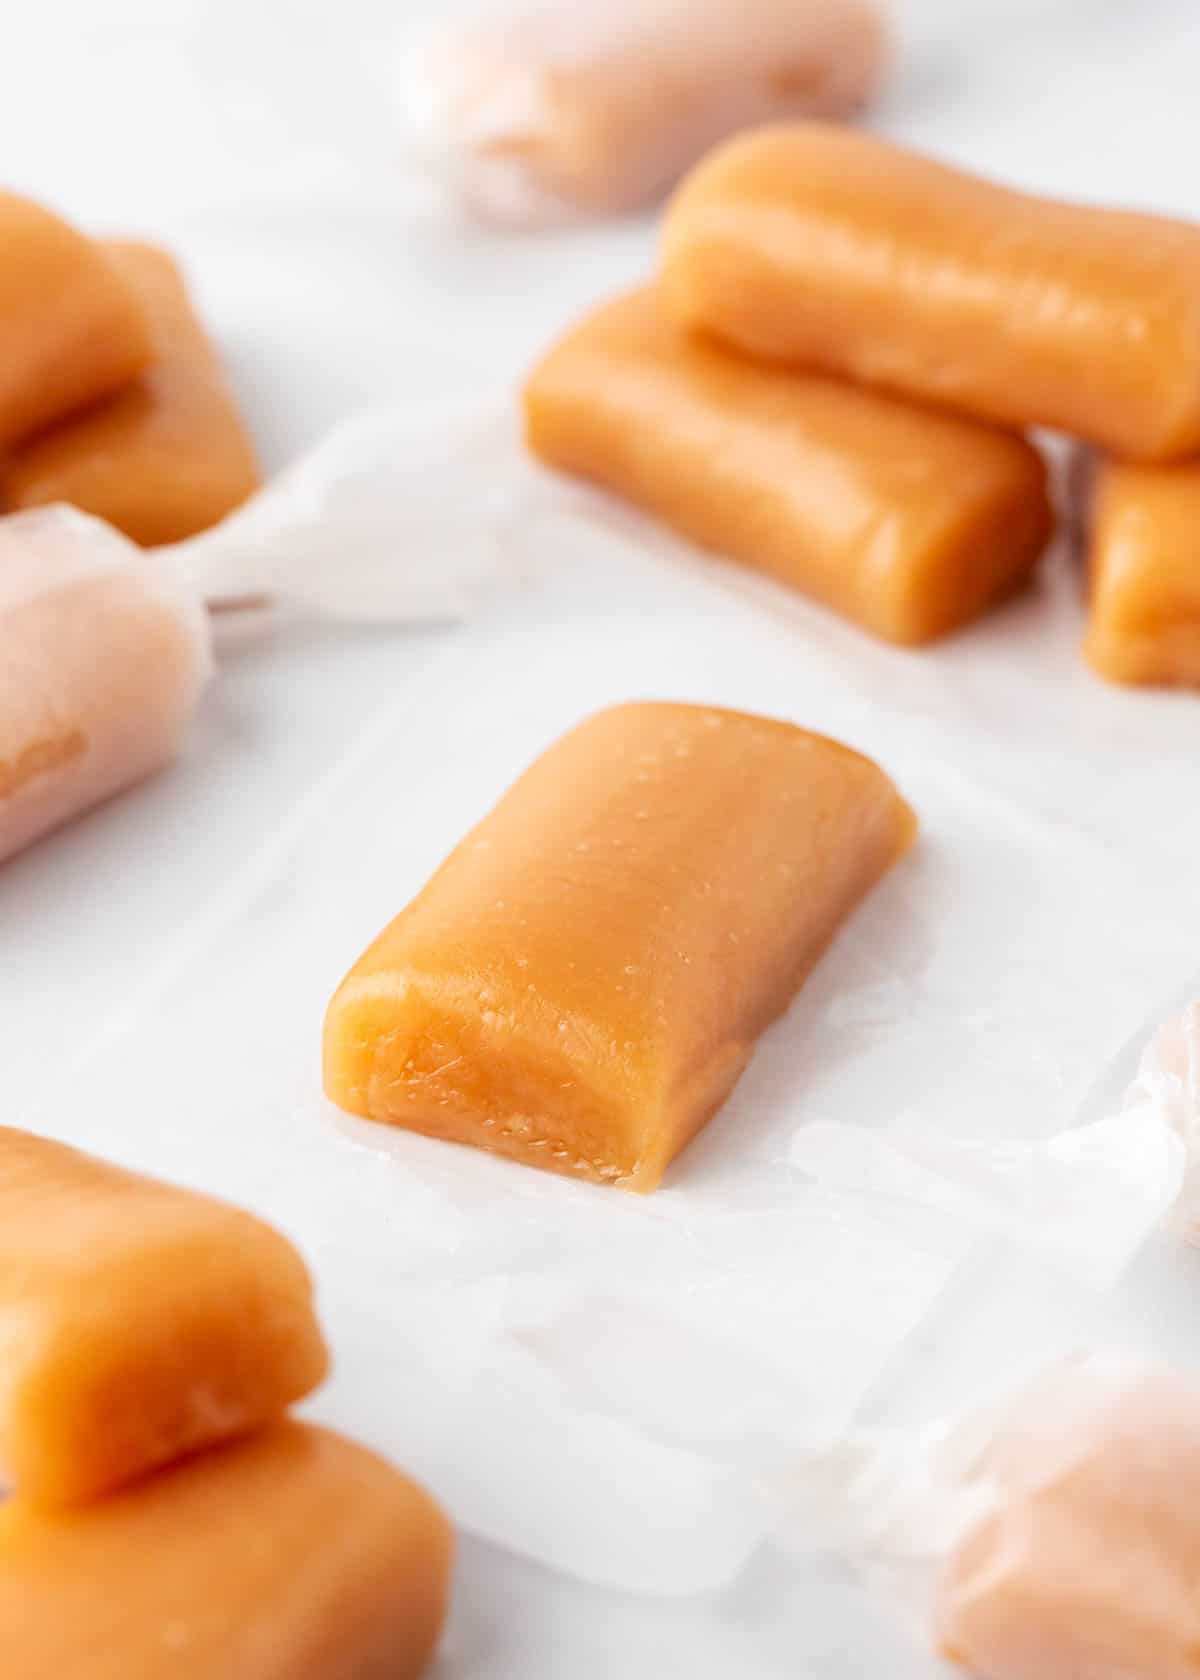 Caramel being wrapped in wax paper.